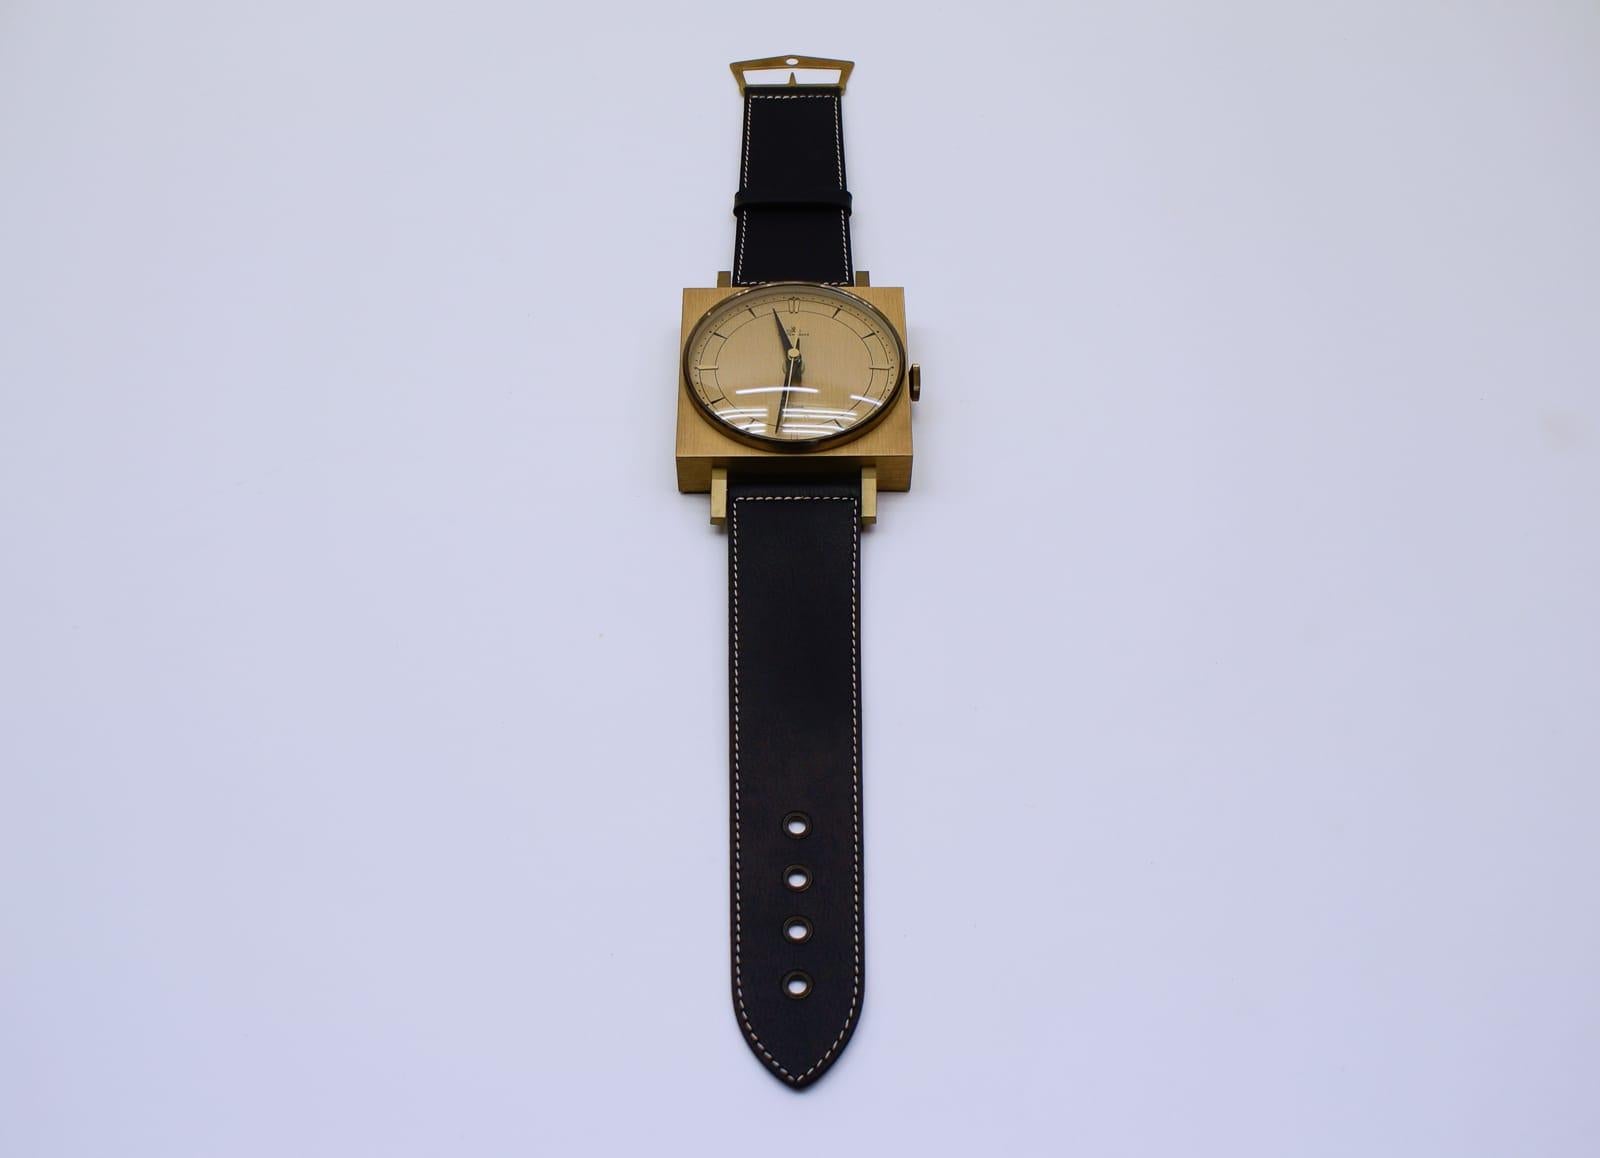 Midcentury wall clock in the form of a wristwatch in leather and brass, Germany

Made in Germany by Meister Anker.

Electric, battery operated clock.